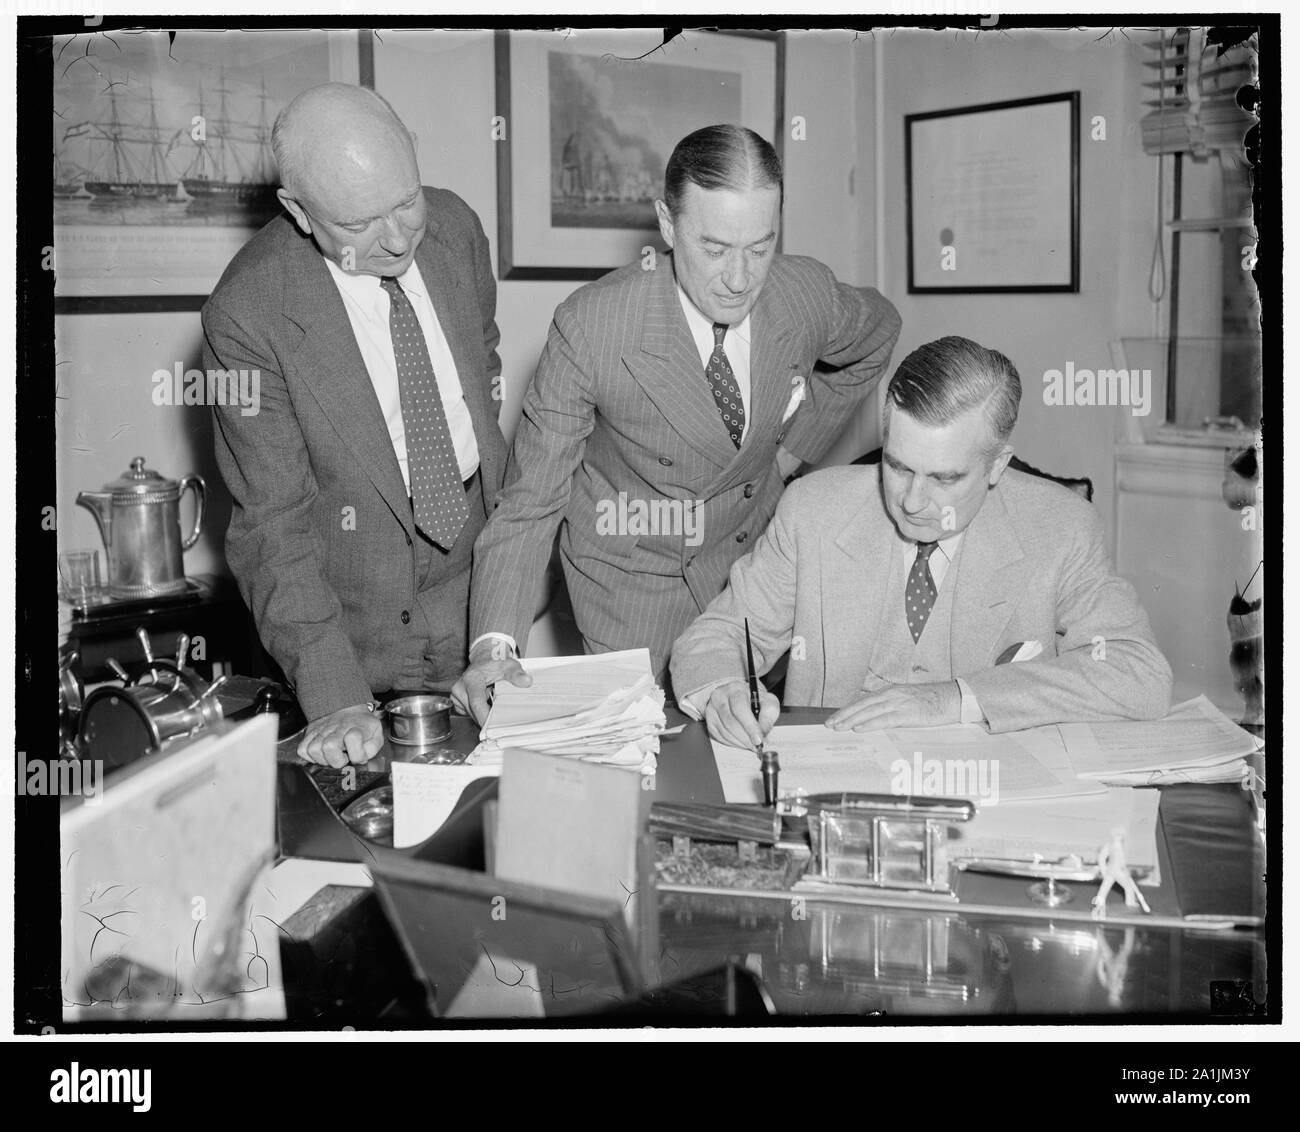 Naval increase on the way. Washington, D.C., June 2. Assist. Secretary of the Navy, Charles Edison, today signed final confirmation on awards to private shipyards for the construction of twenty-four naval vessels totaling 159,800 tons. Approximate cost will be $350,000,000. Picture shows, left to right: Warren McLaine, Assist. to Judge Advocate General of the Navy; Rear Admiral W.B. Woodson, Judge Advocate General of the Navy; and Charles Edison, Assist. Secretary of the Navy Stock Photo